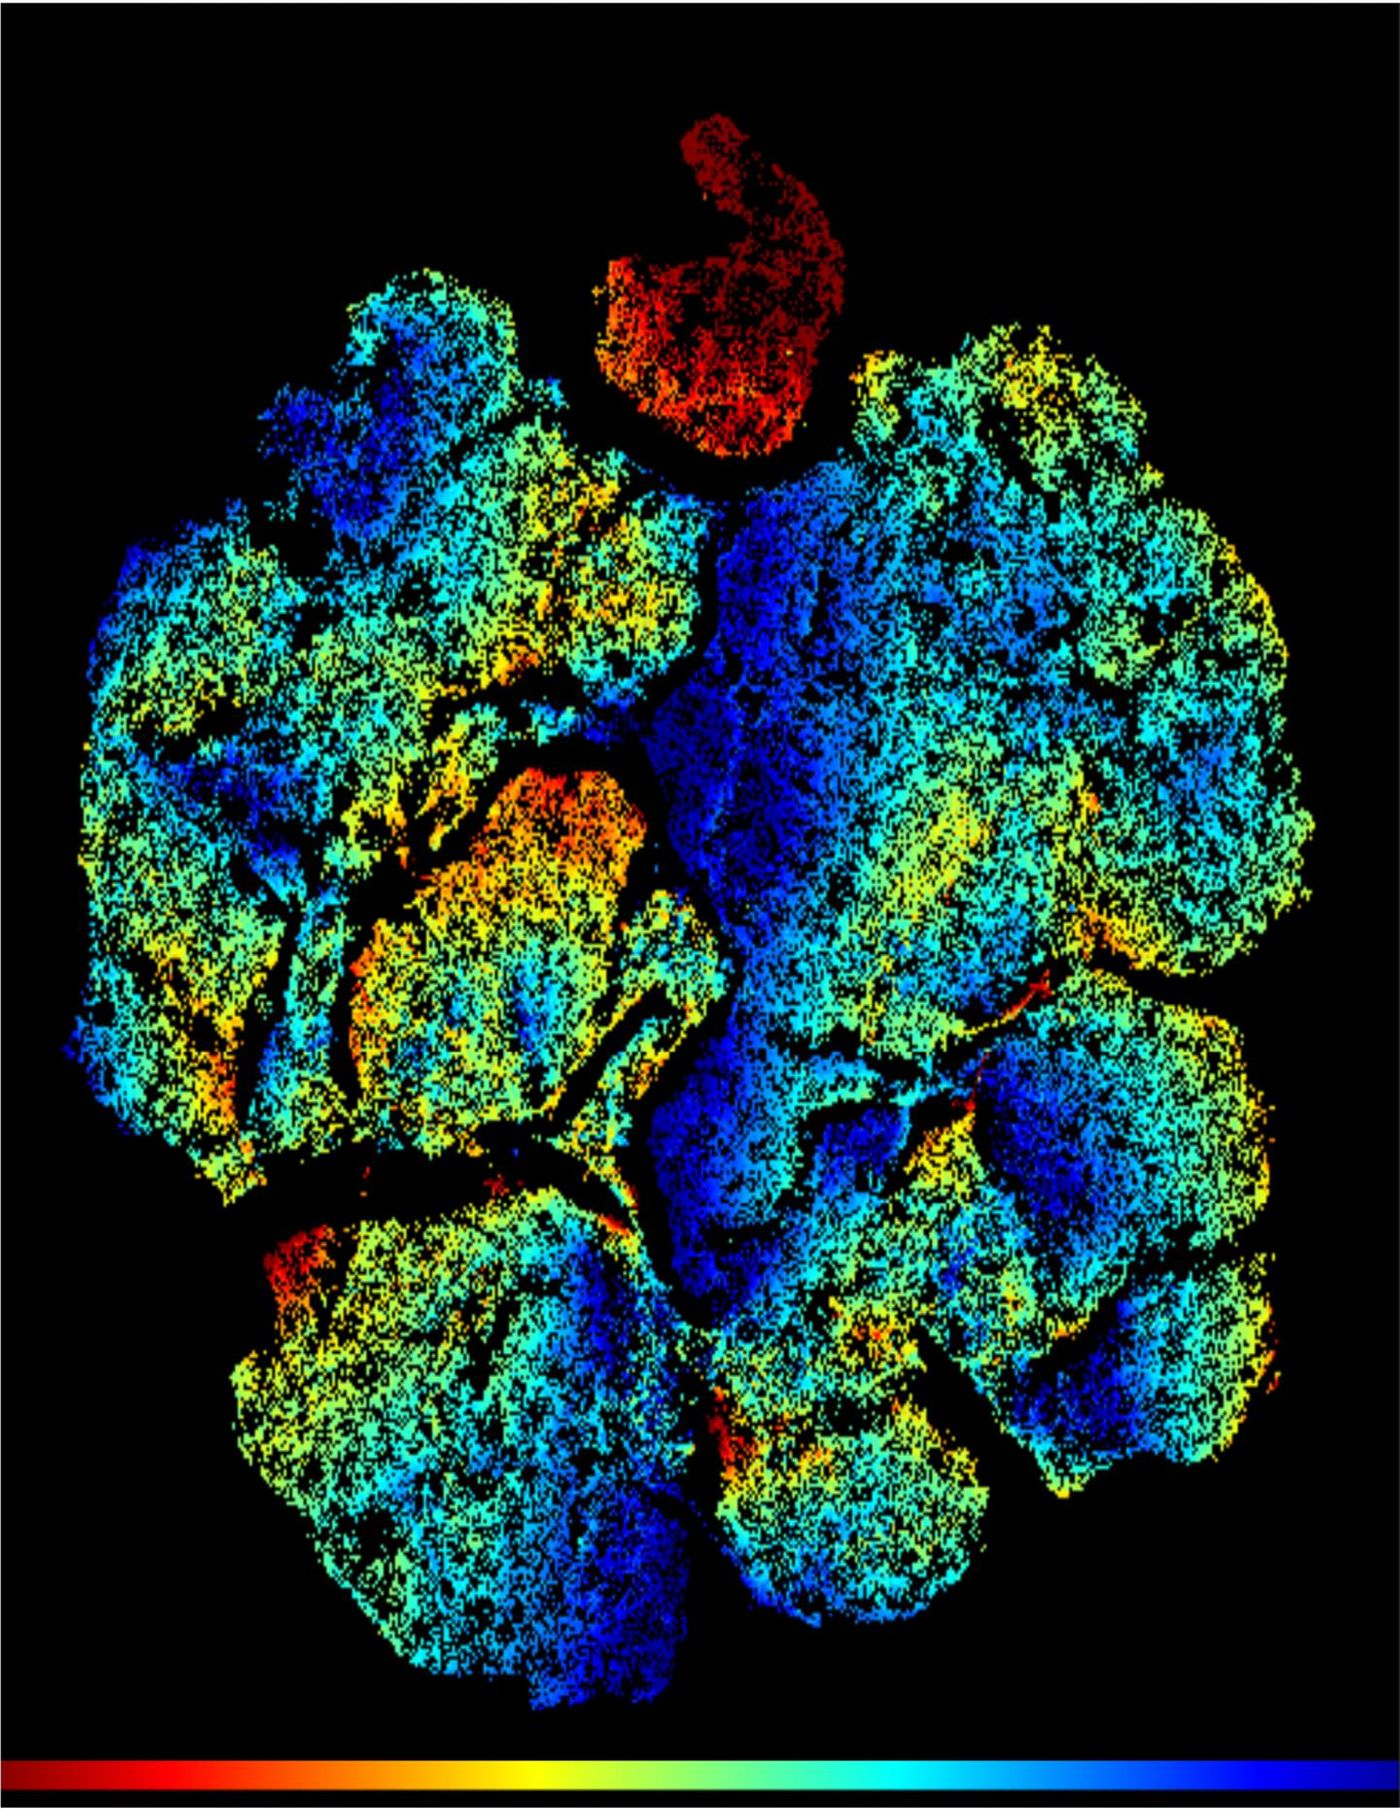 A plot of immature T cells in the thymus: T cell progenitors in red.